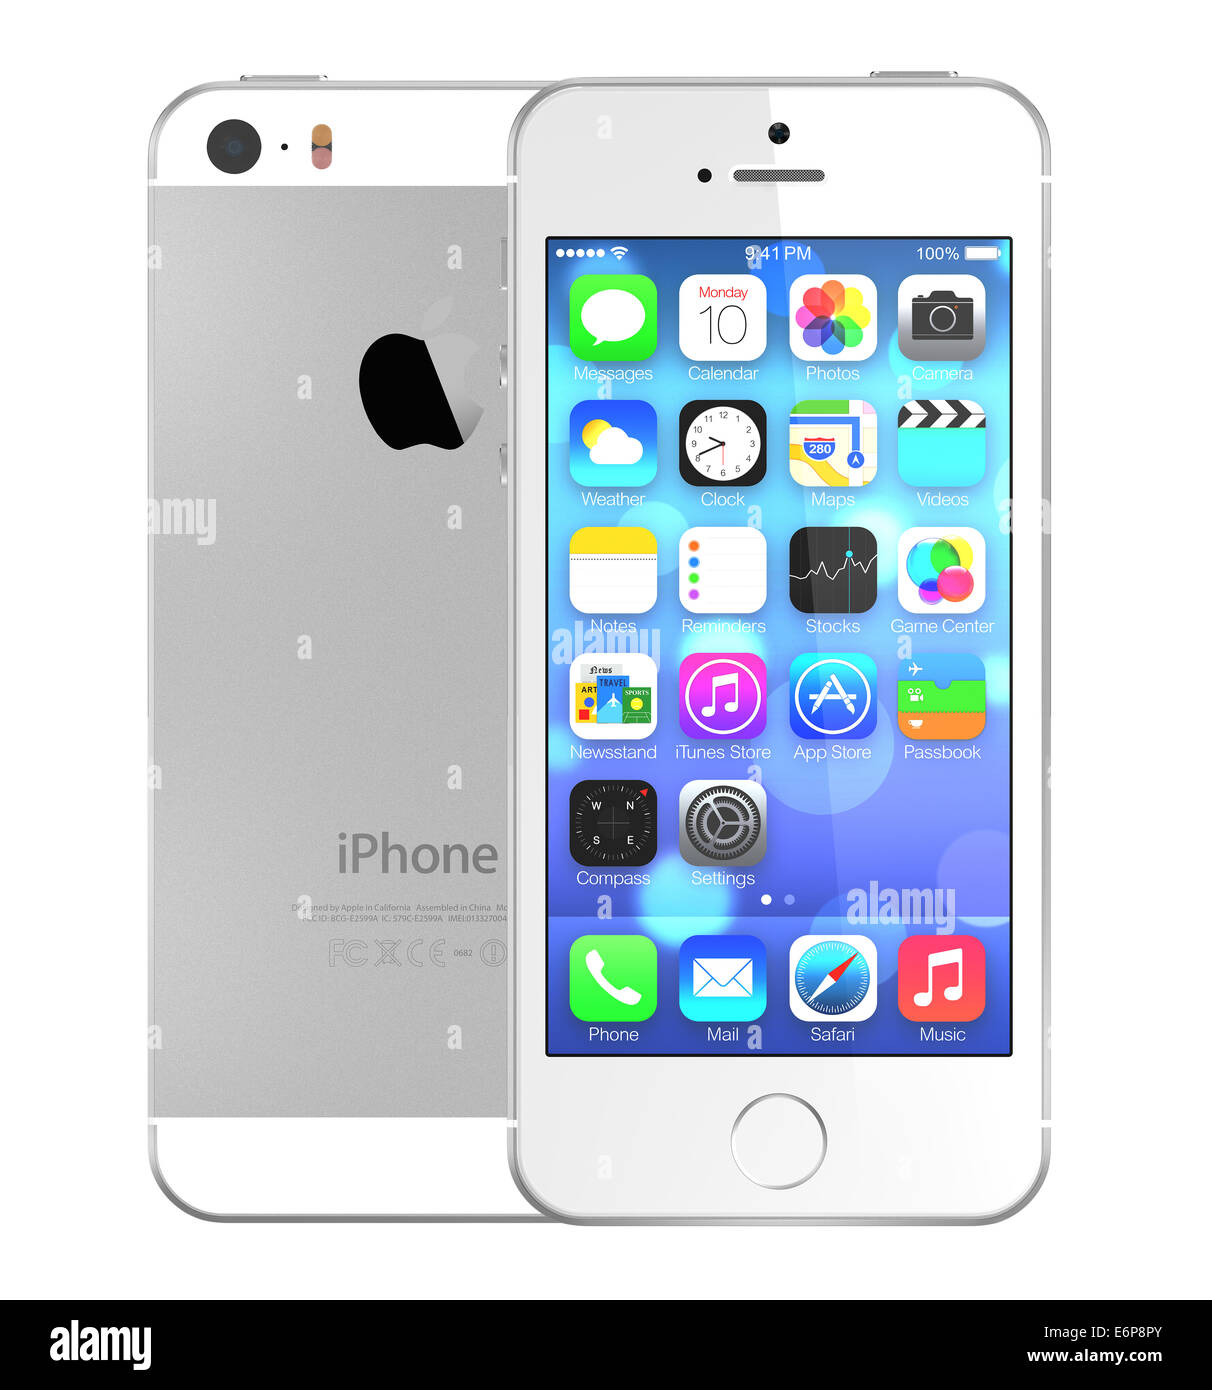 Silver iPhone 5s showing the home screen with iOS7. Stock Photo